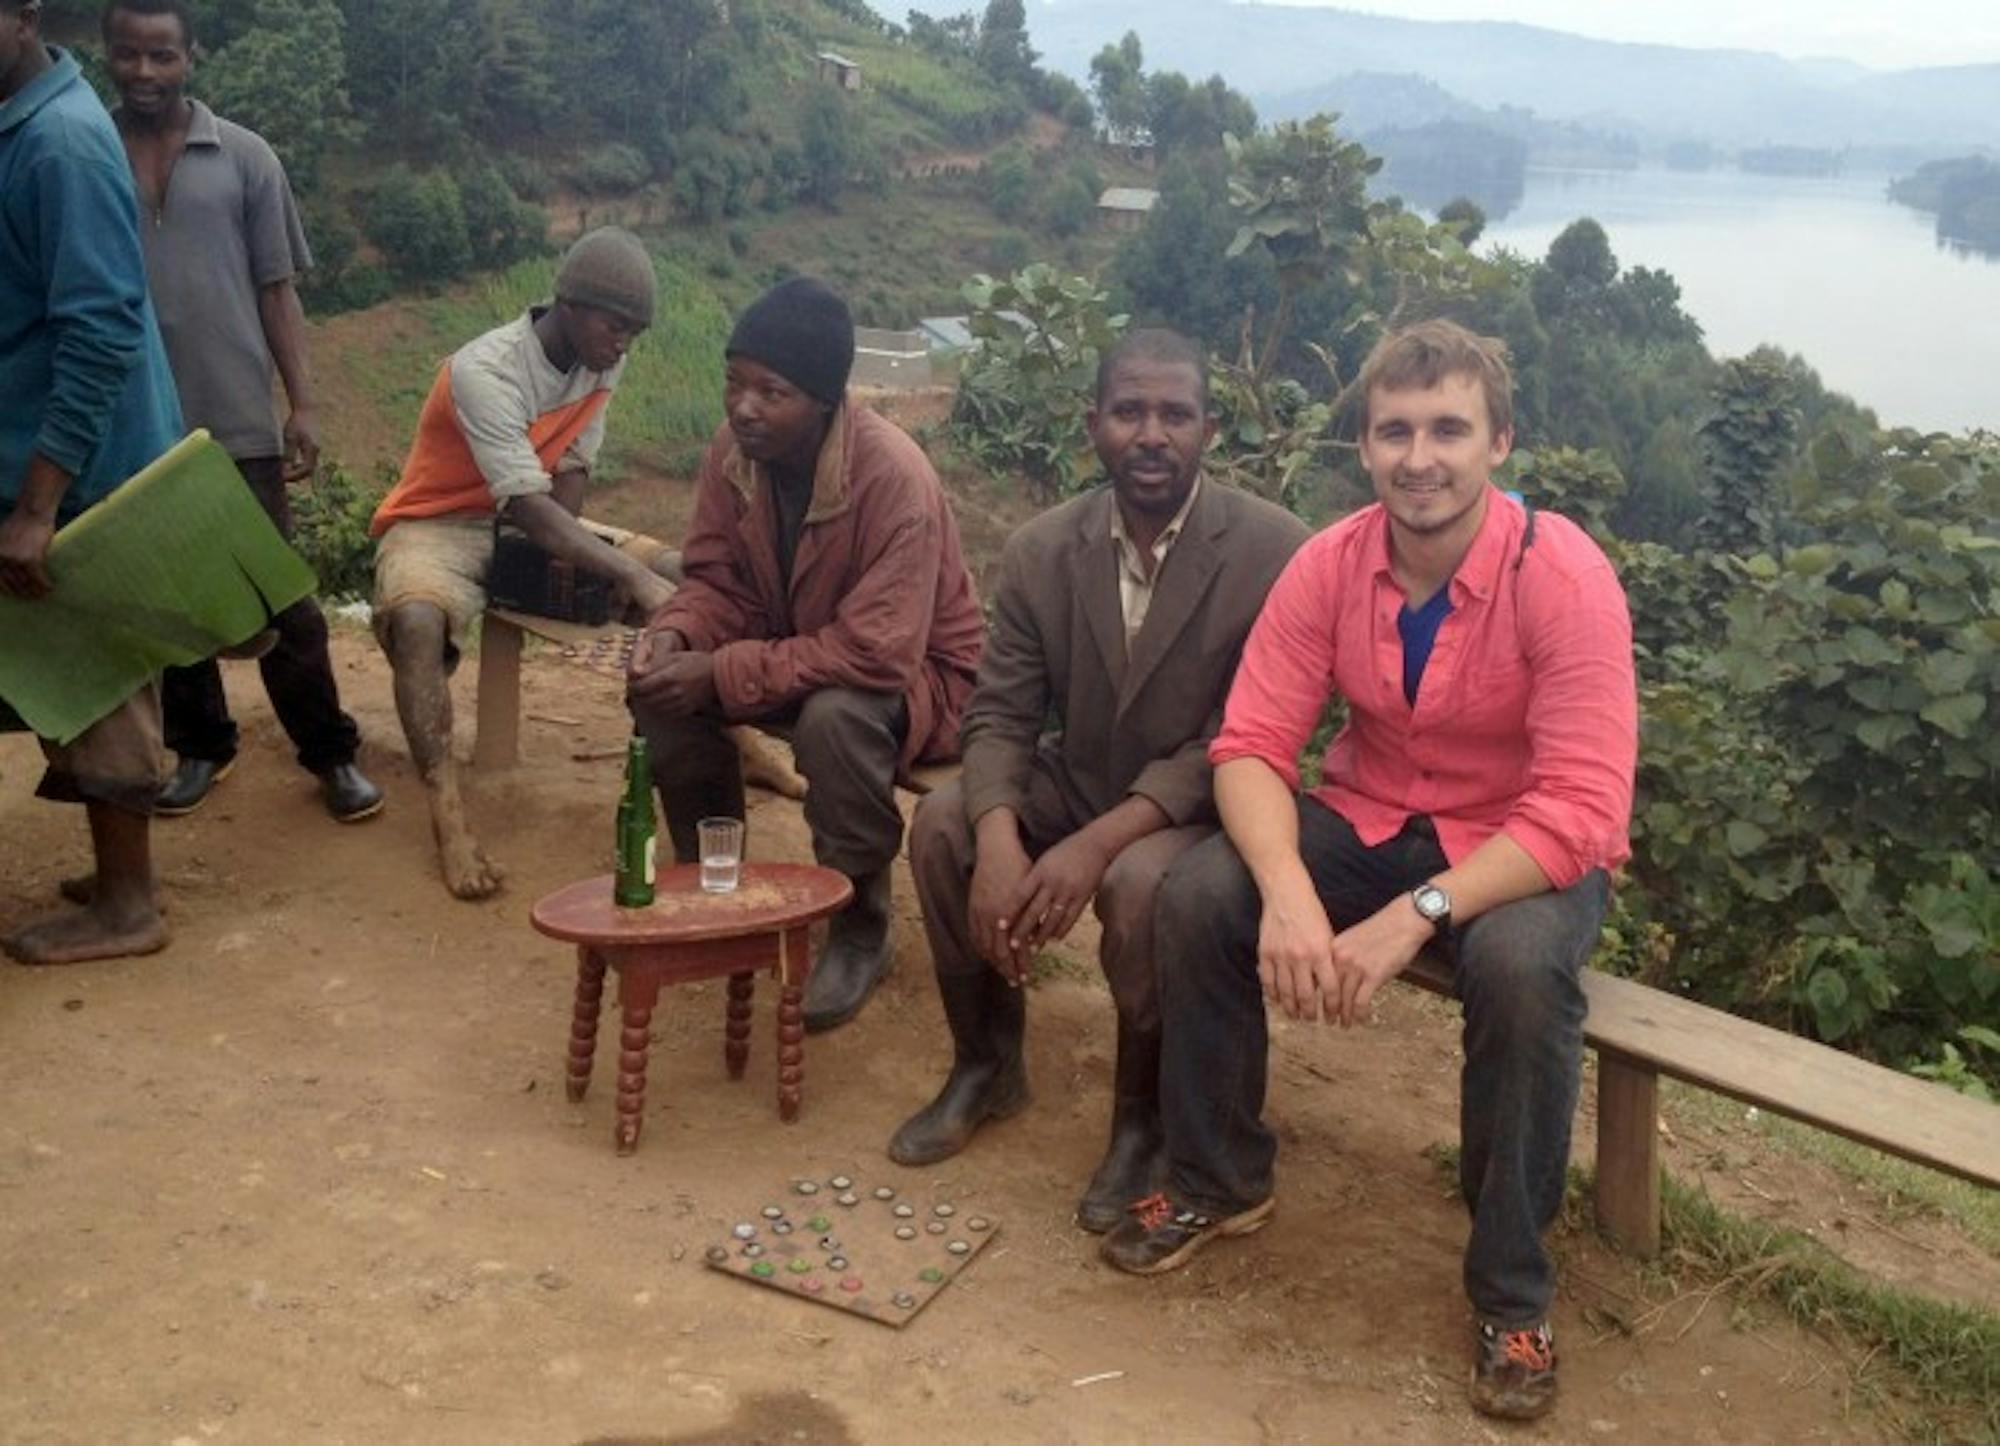 Senior Graham Englert poses with community members around Lake Bunyonyi outside Kabale in southwest Uganda. Englert studied the effects of disease outbreaks on healthcare workers in the region this summer.